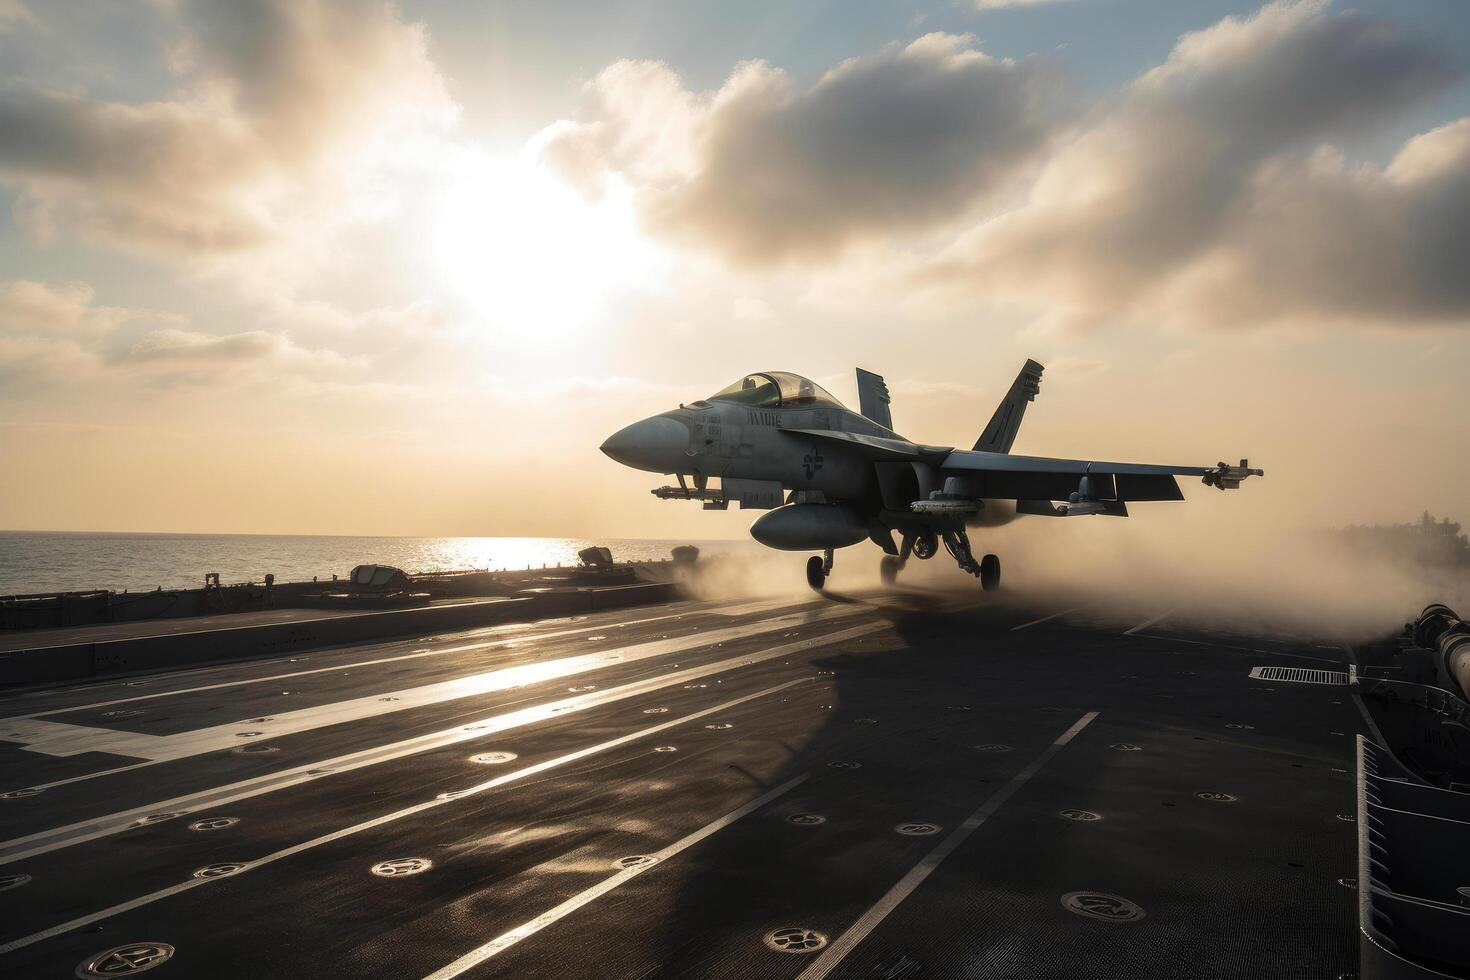 Fighter aircraft on the deck of a military aircraft carrier at sunset, Fighter jets are taking off from an aircraft carrier, photo